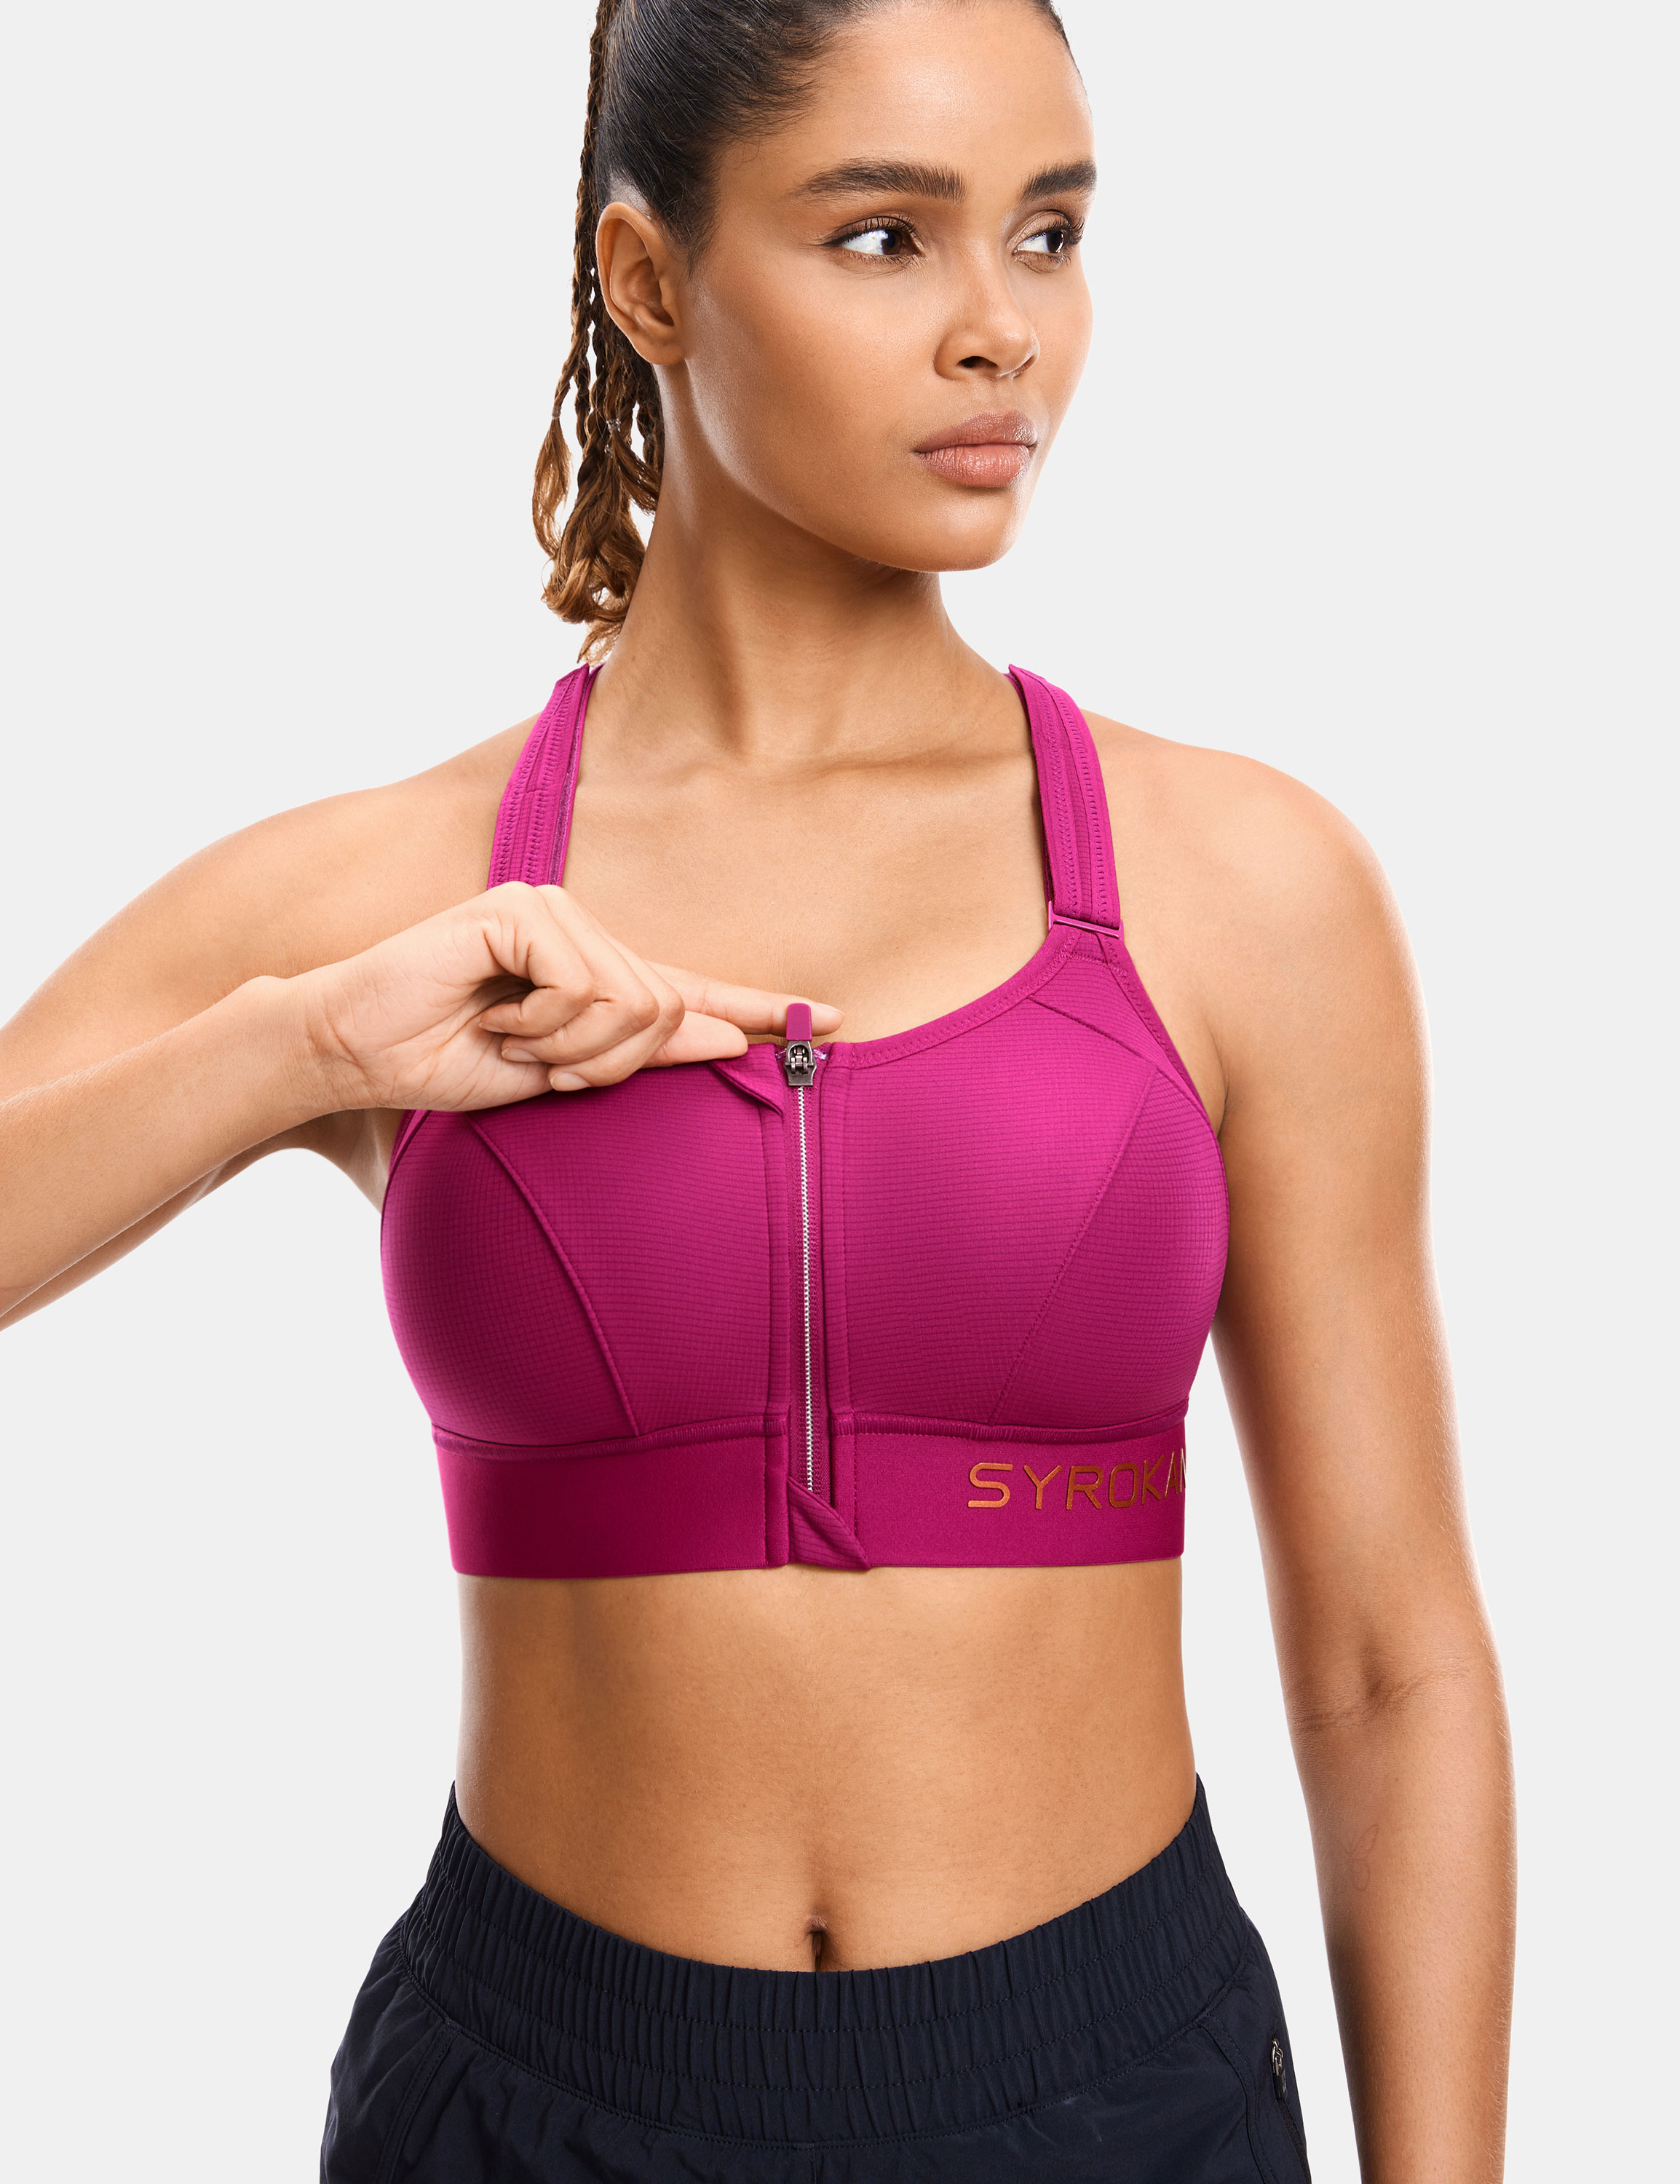 SYROKAN Womens' Sports Bra High Impact Support Zip Front Adjustable Large  Bust